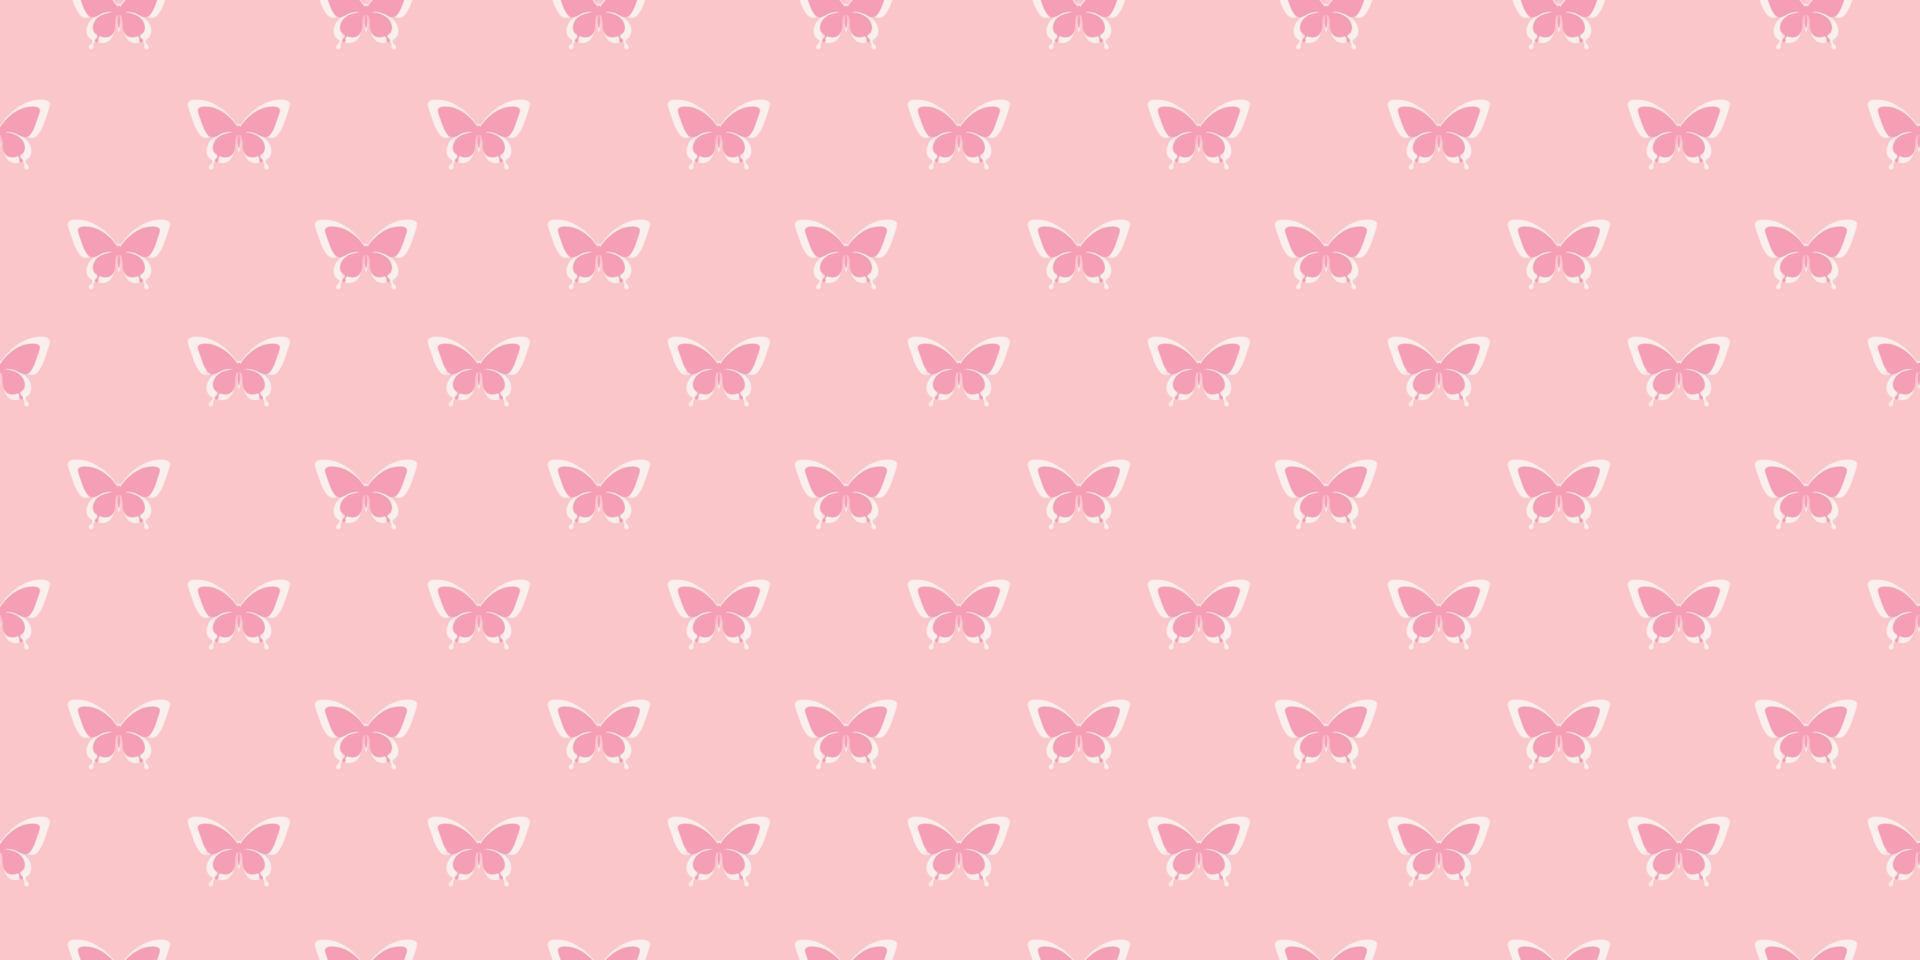 Pink butterfly seamless repeat pattern background vector